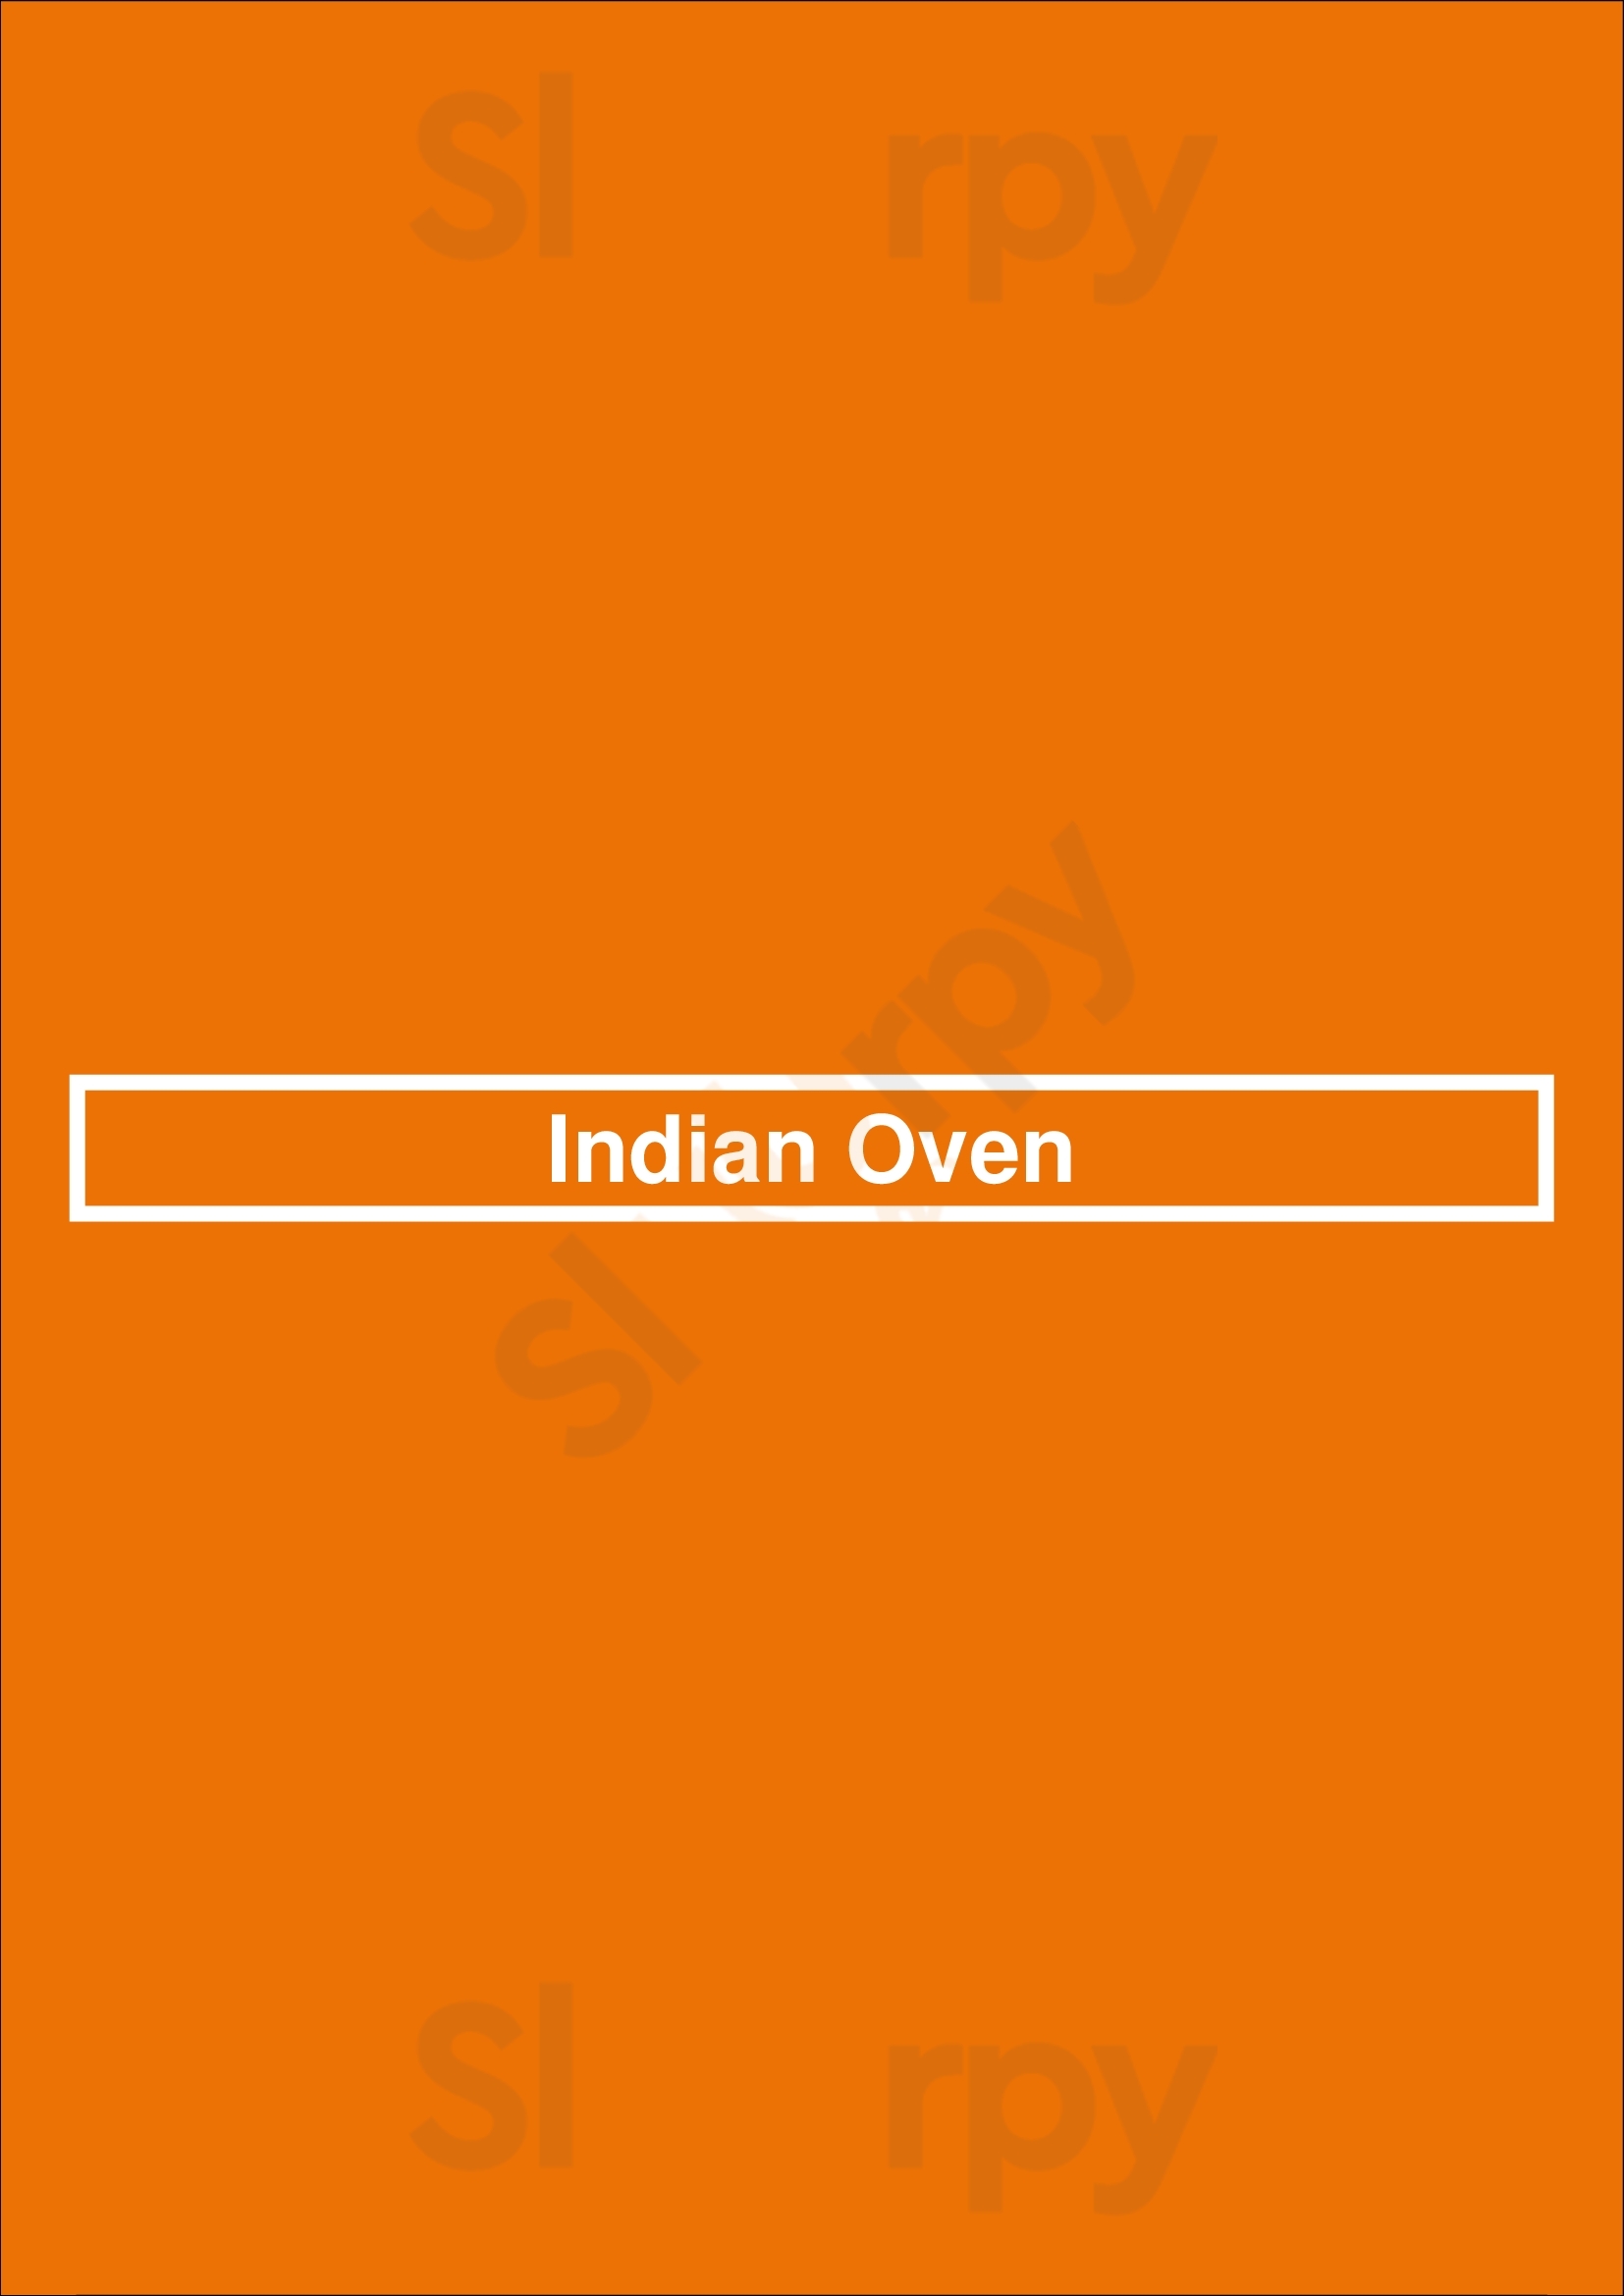 Indian Oven Vancouver Menu - 1